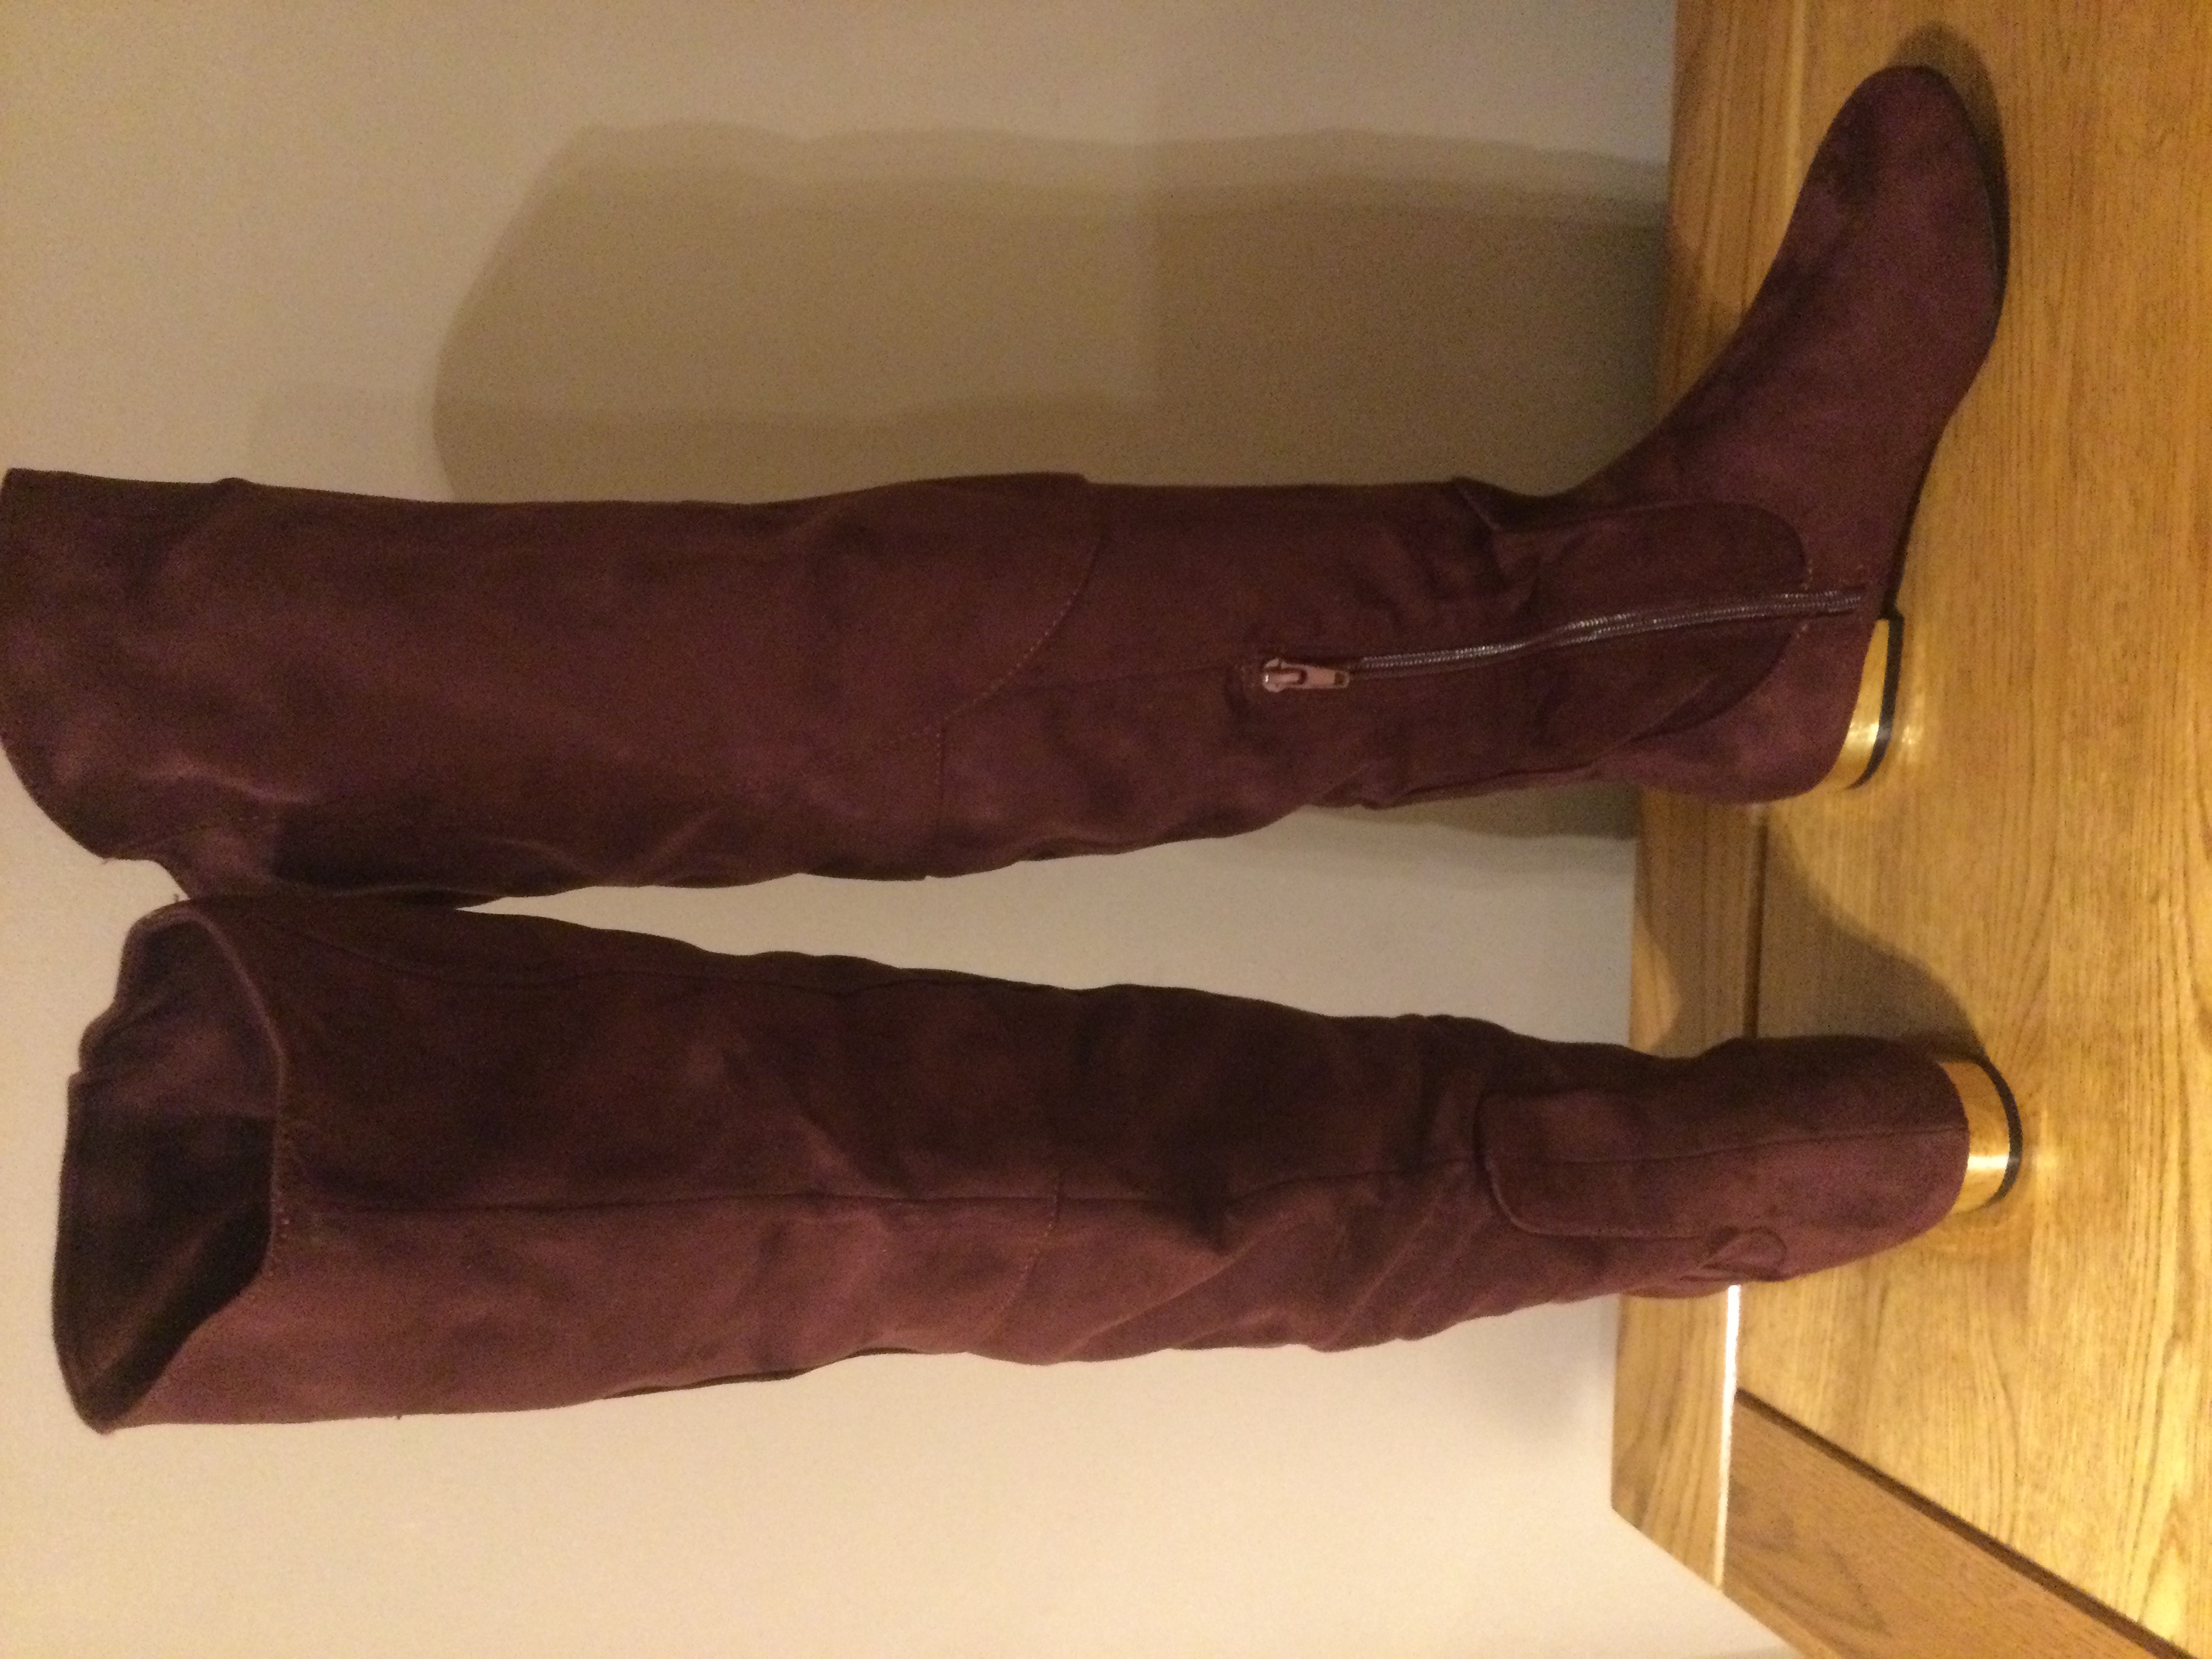 Dolcis “Katie” Long Boots, Low Heel, Size 4, Burgundy - New RRP £55.00